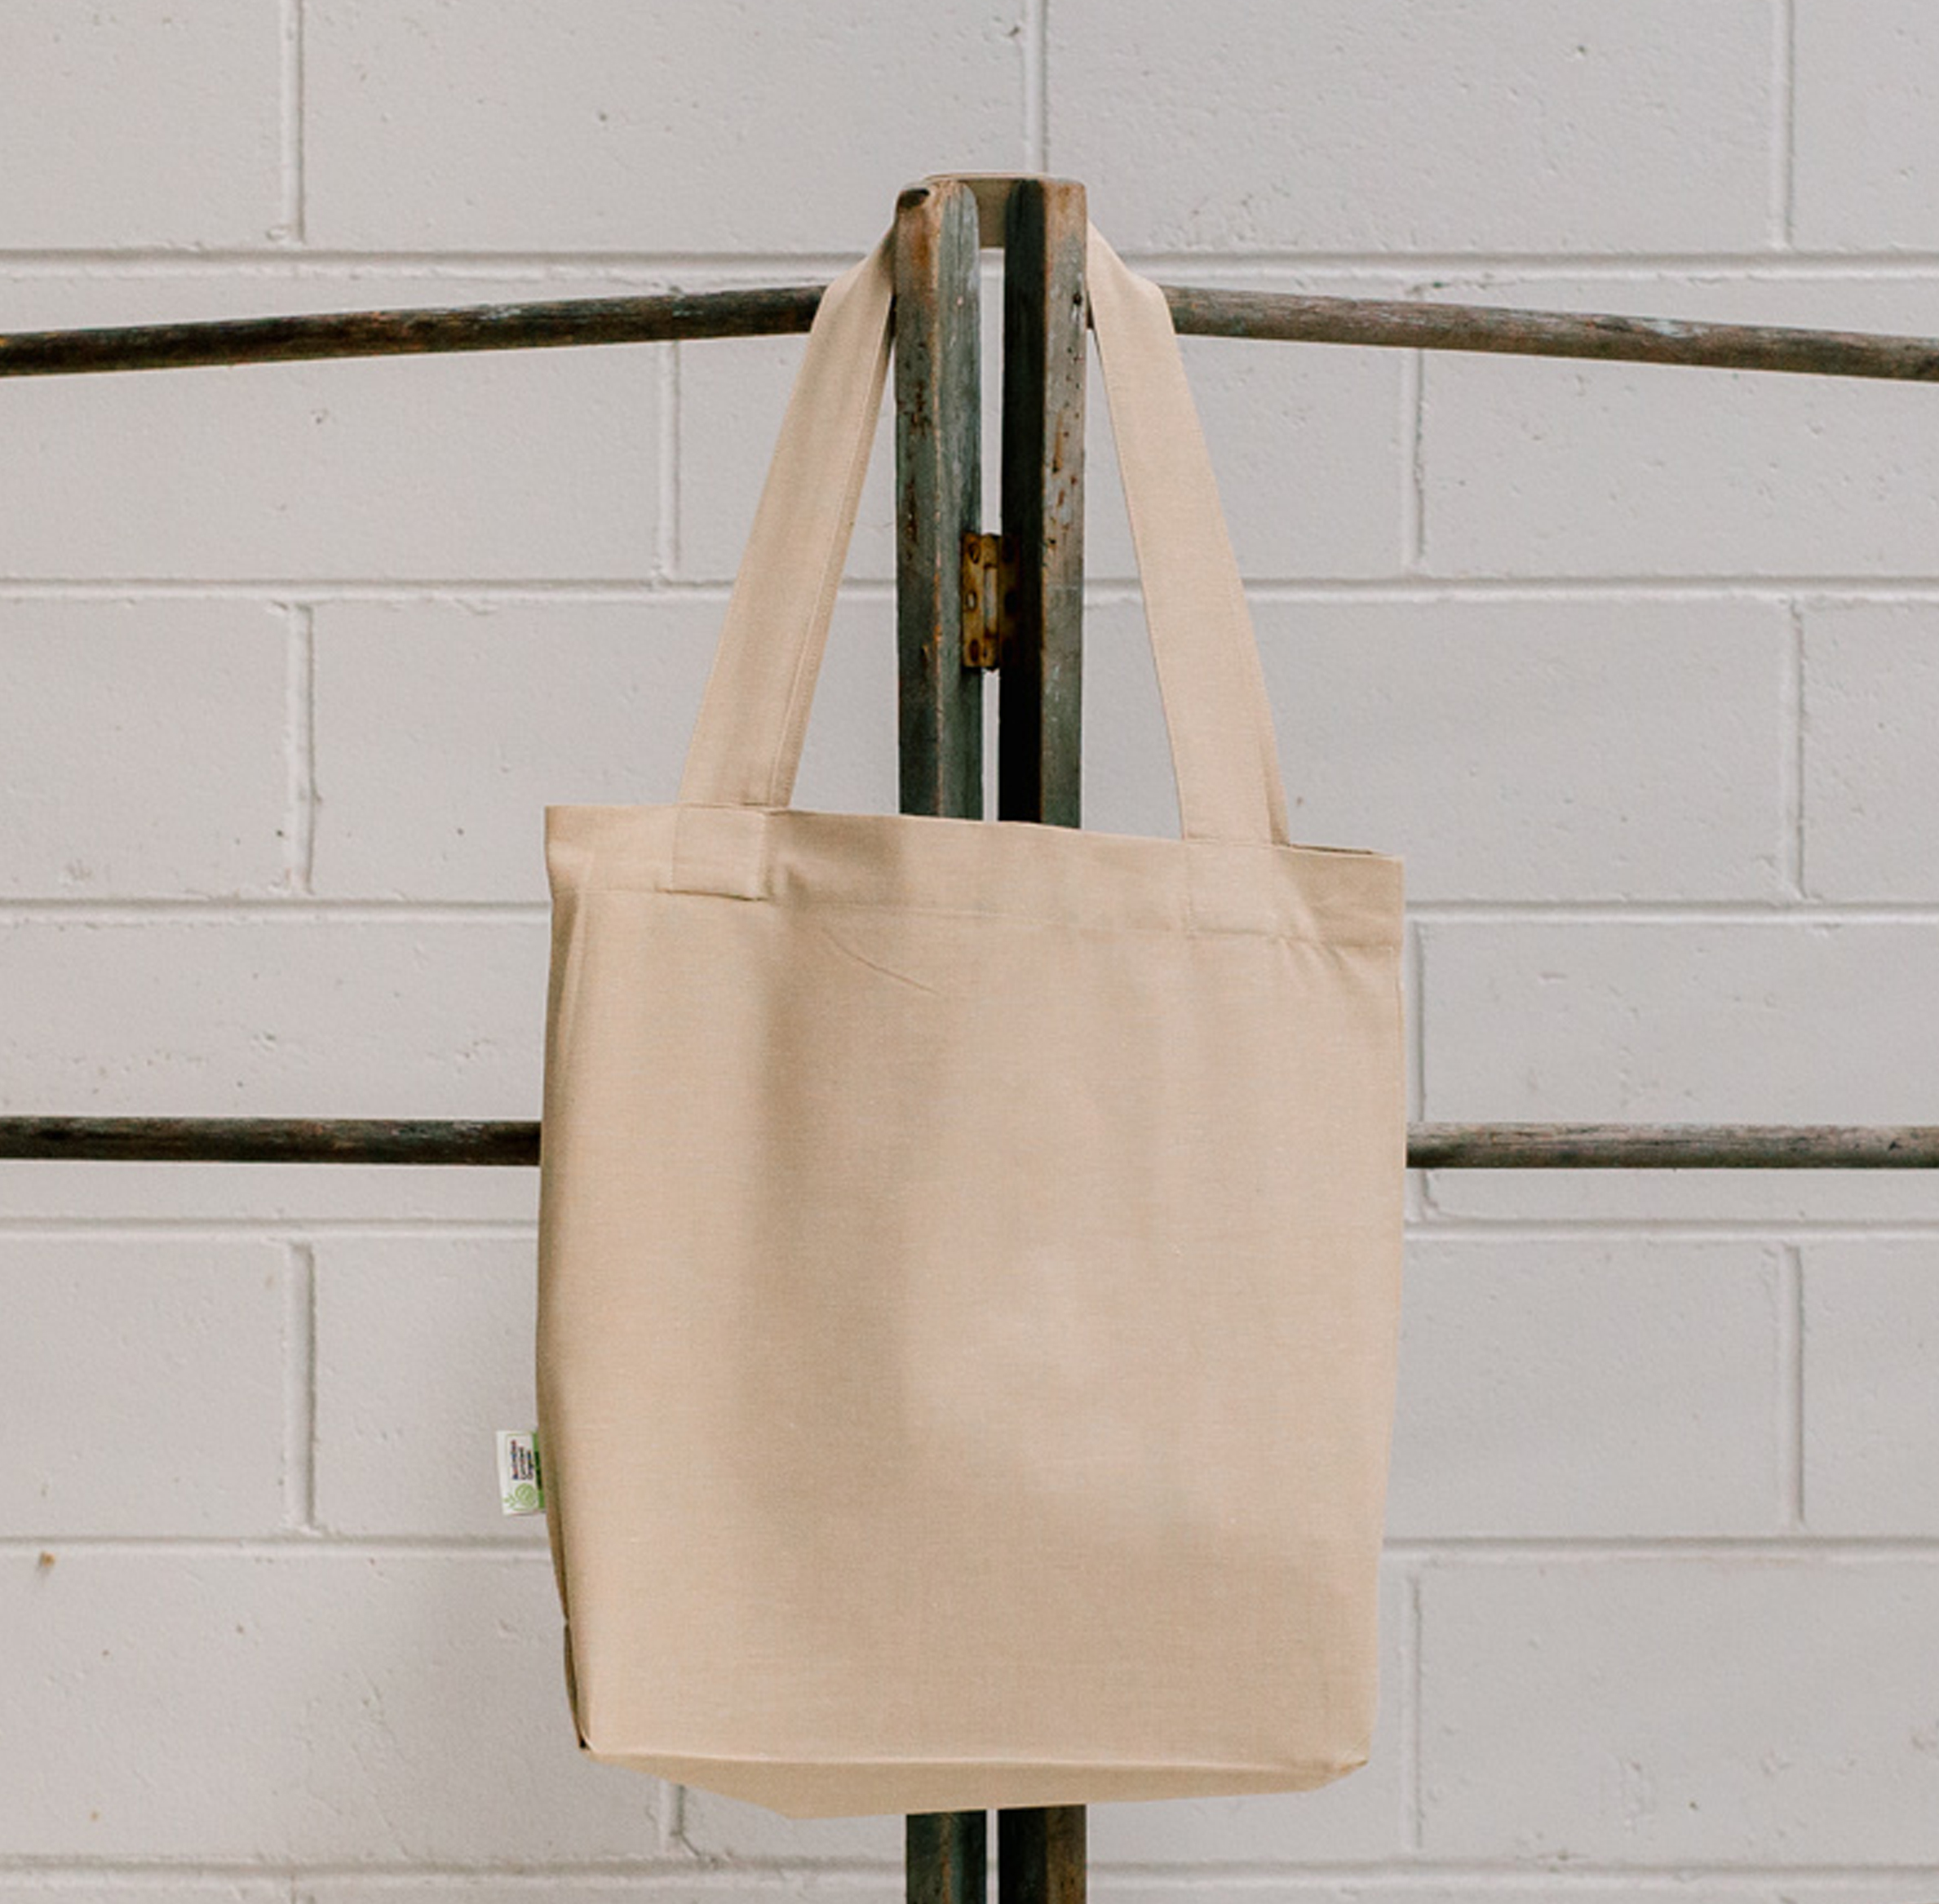 Blank Tote Bag for Your Design - Mix & Match